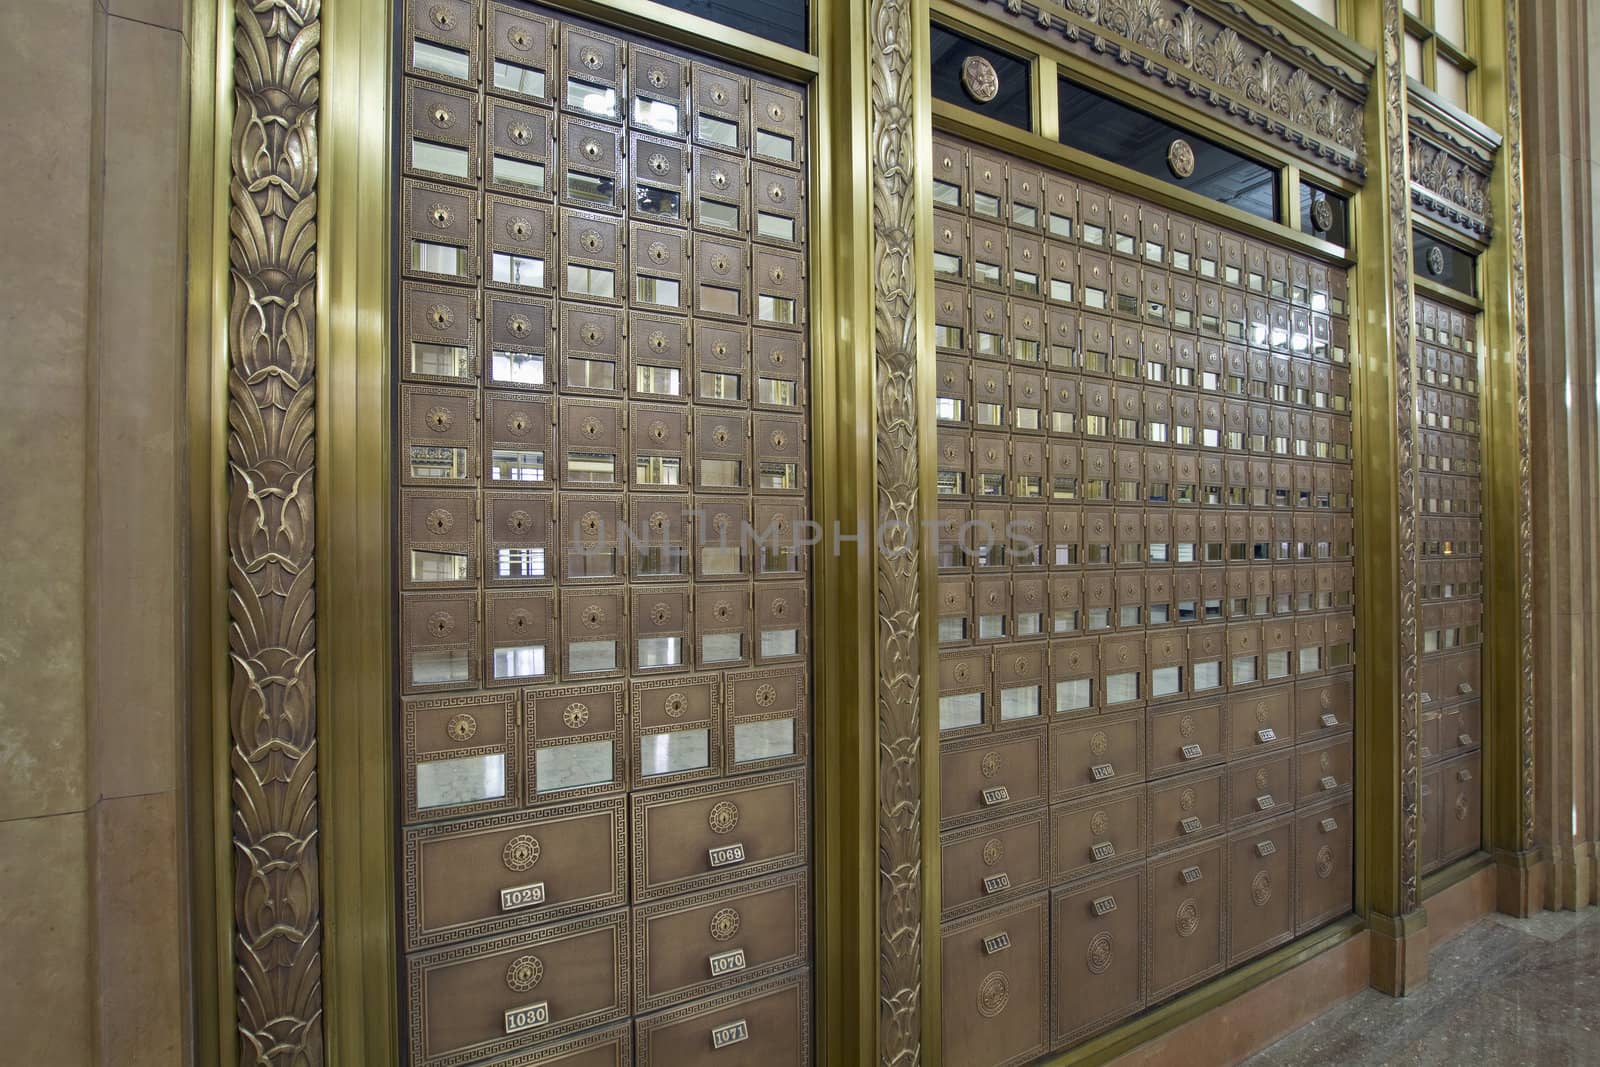 Antique Post Office Mail Boxes in Historic Building Angle